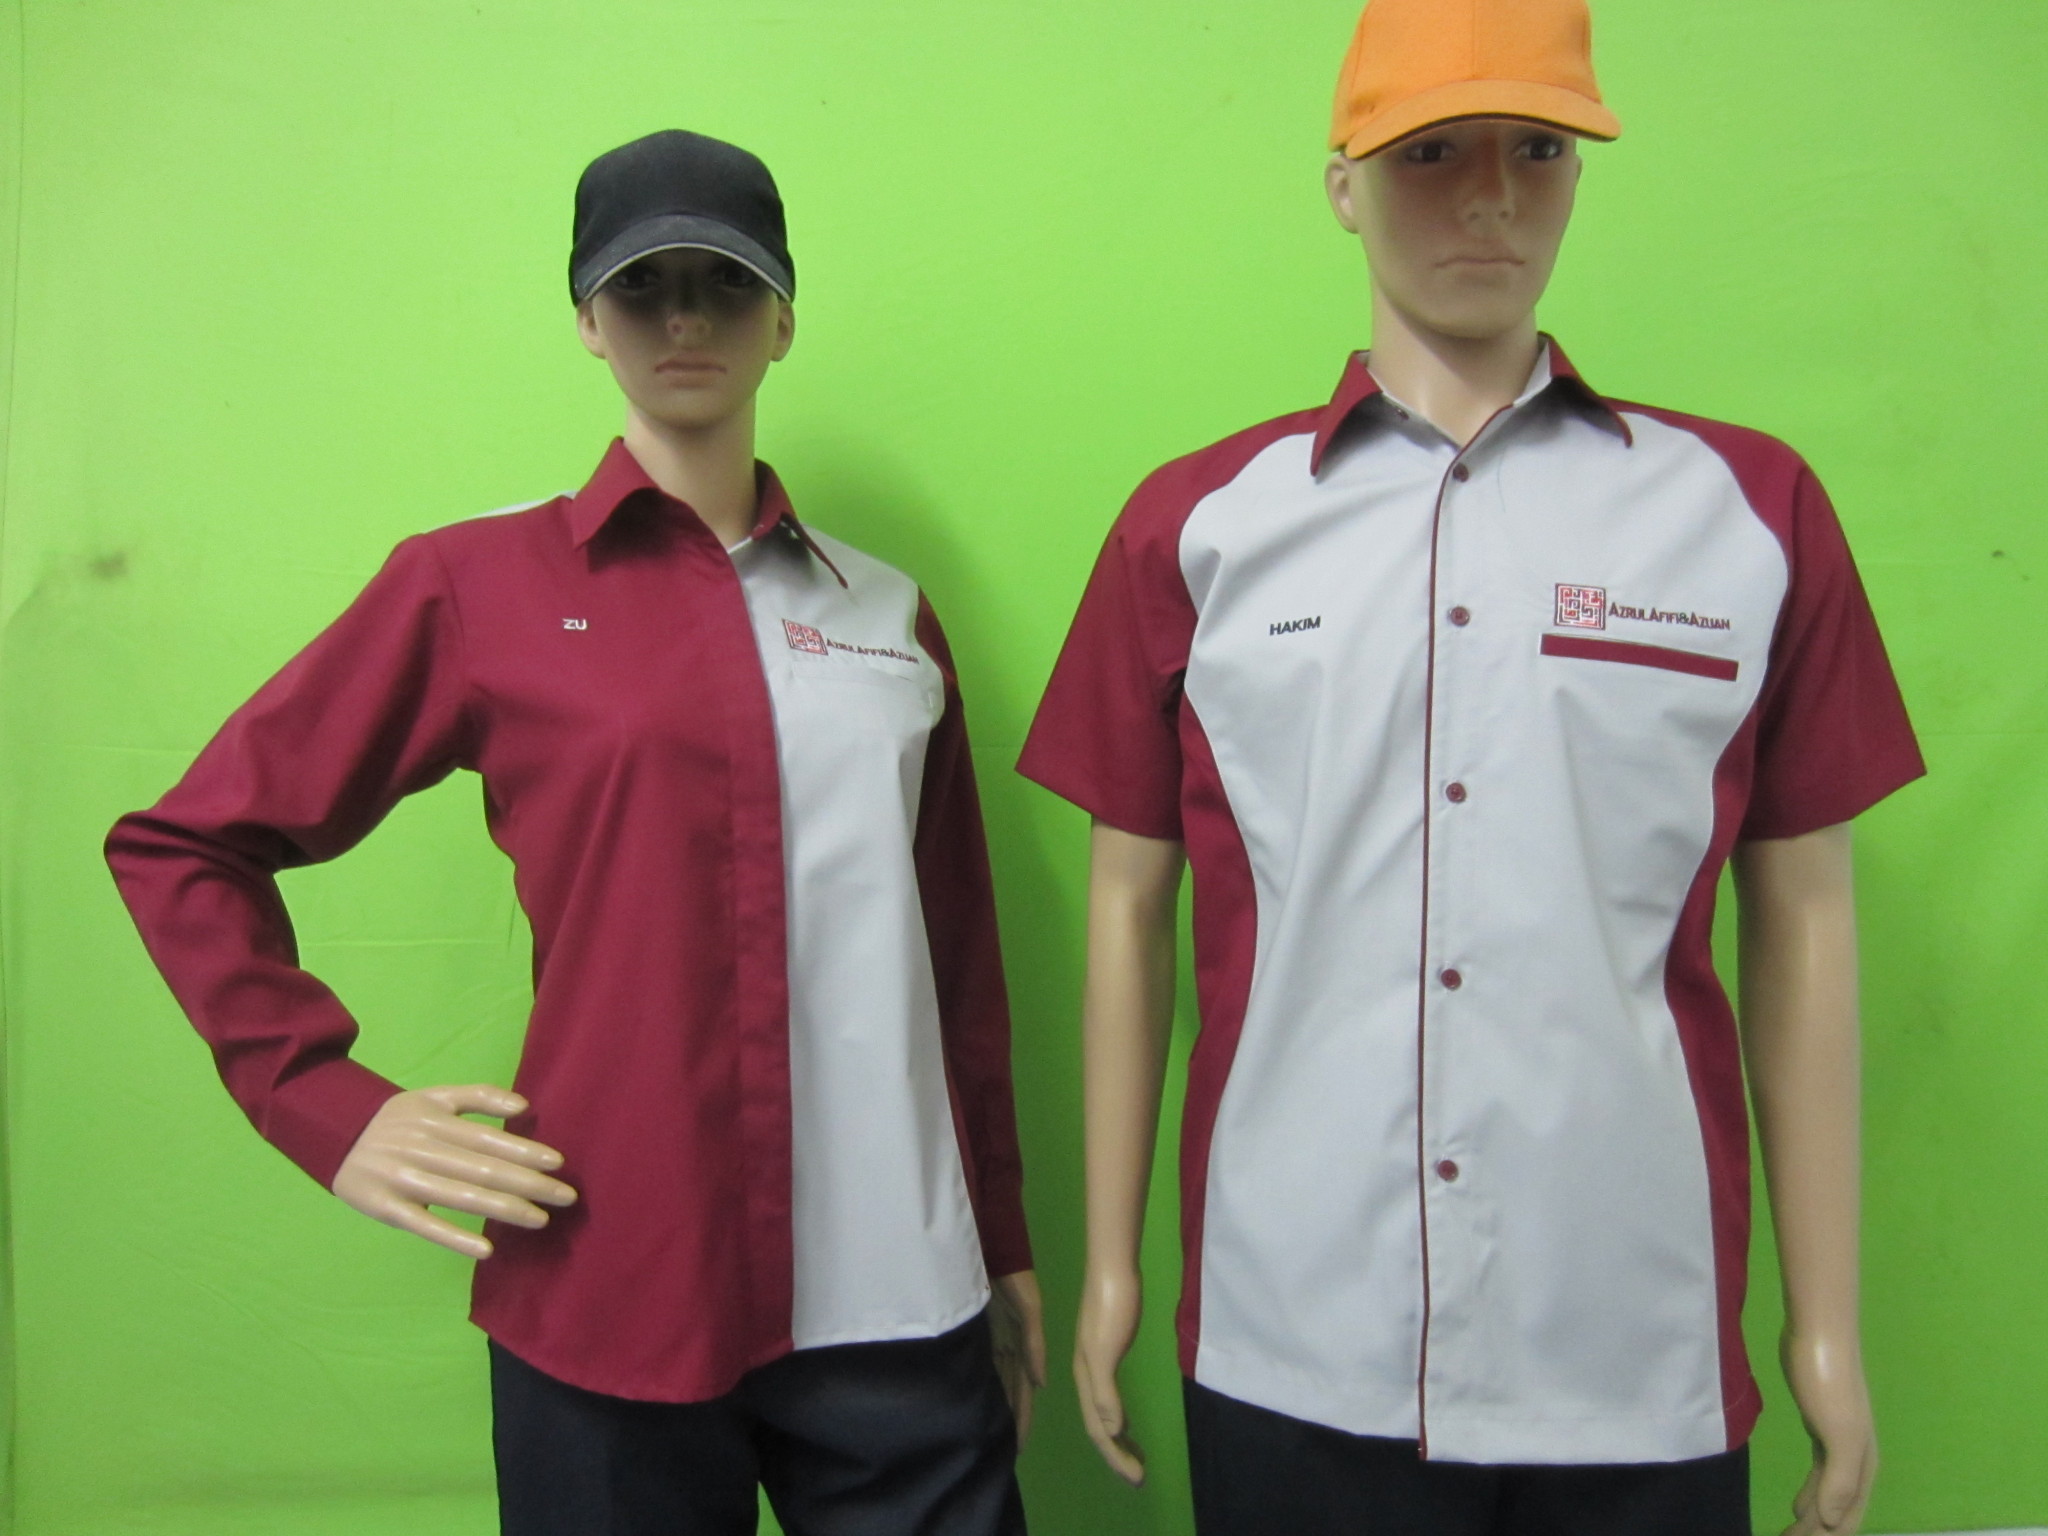 At Works Uniforms